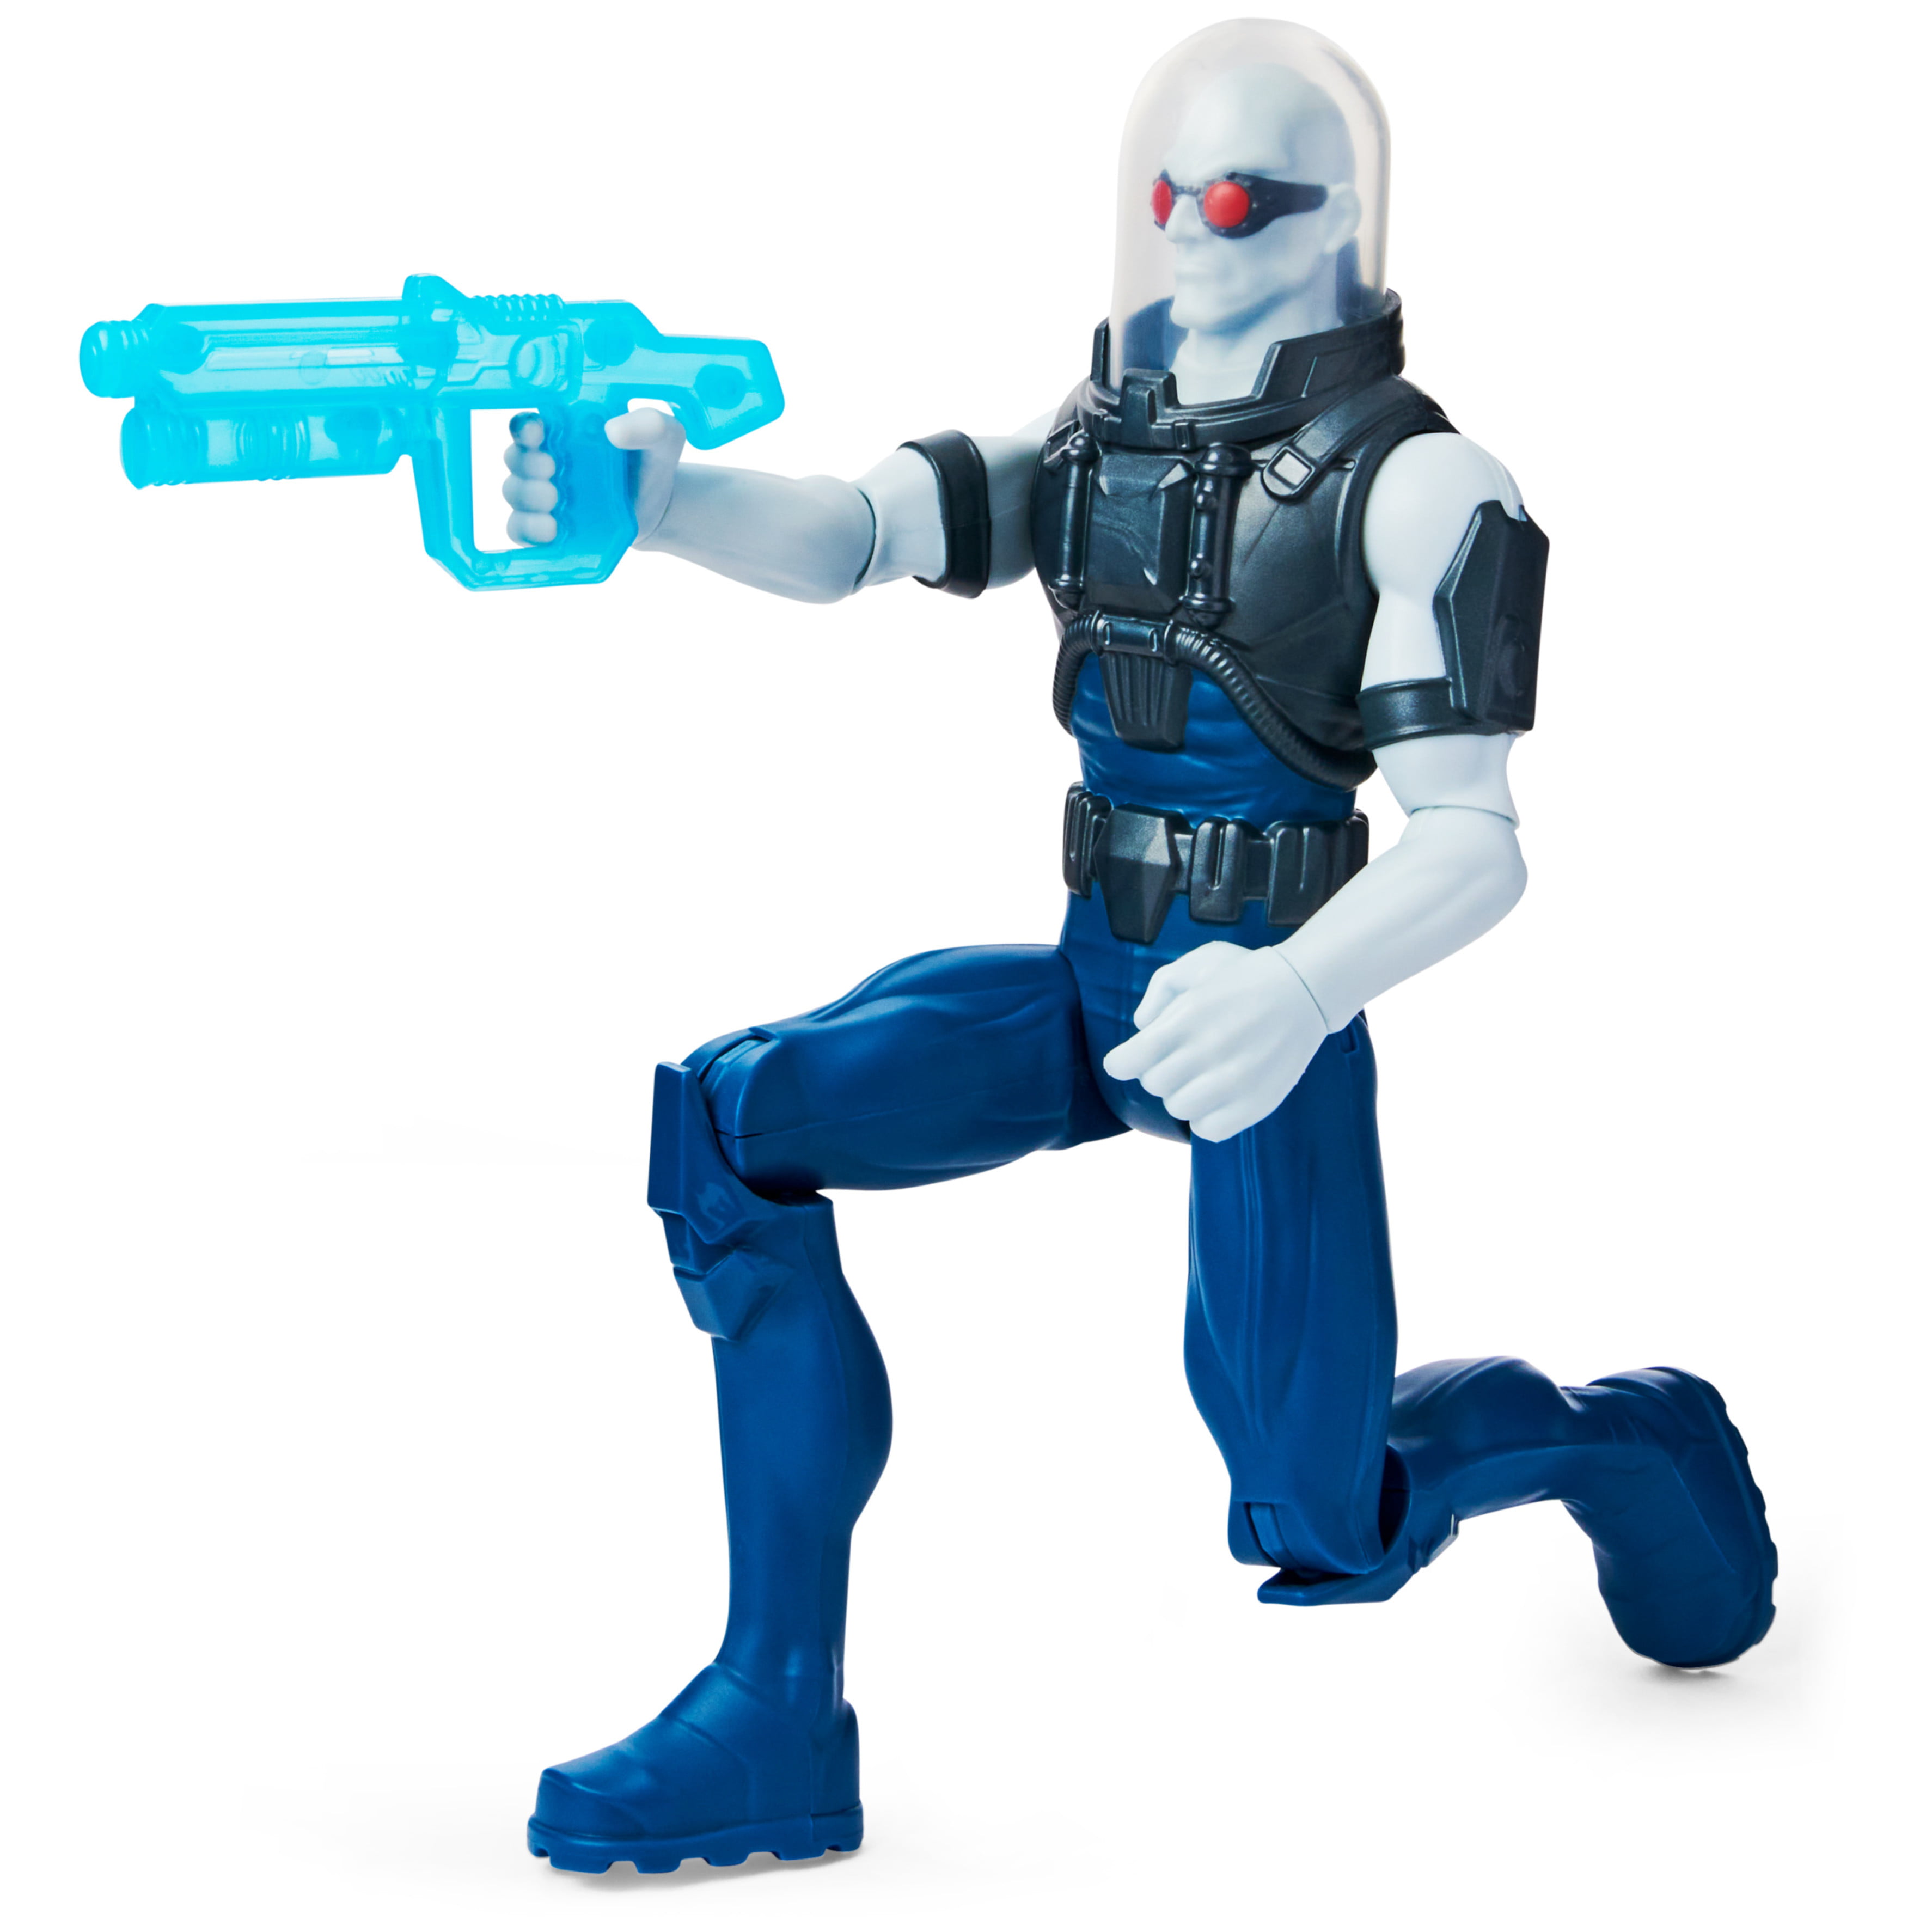 Batman 12-Inch Mr. Freeze Action Figure with Blaster Accessory, Kids Toys  for Boys Aged 3 and up